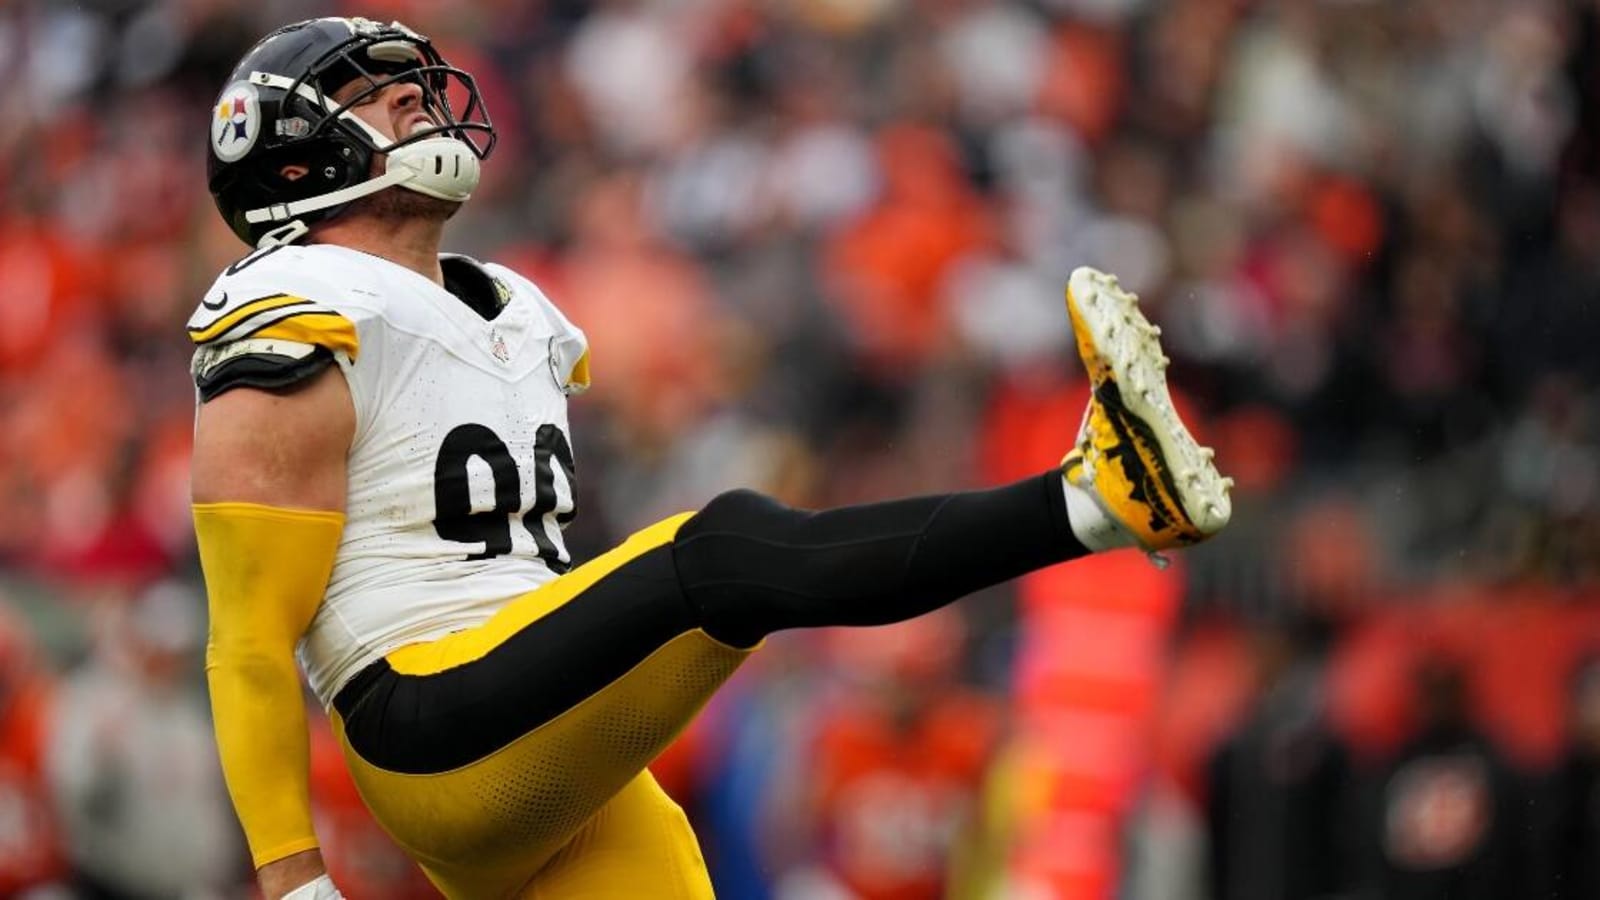 Mike Tomlin: T.J. Watt ‘is the best defensive player on the planet’